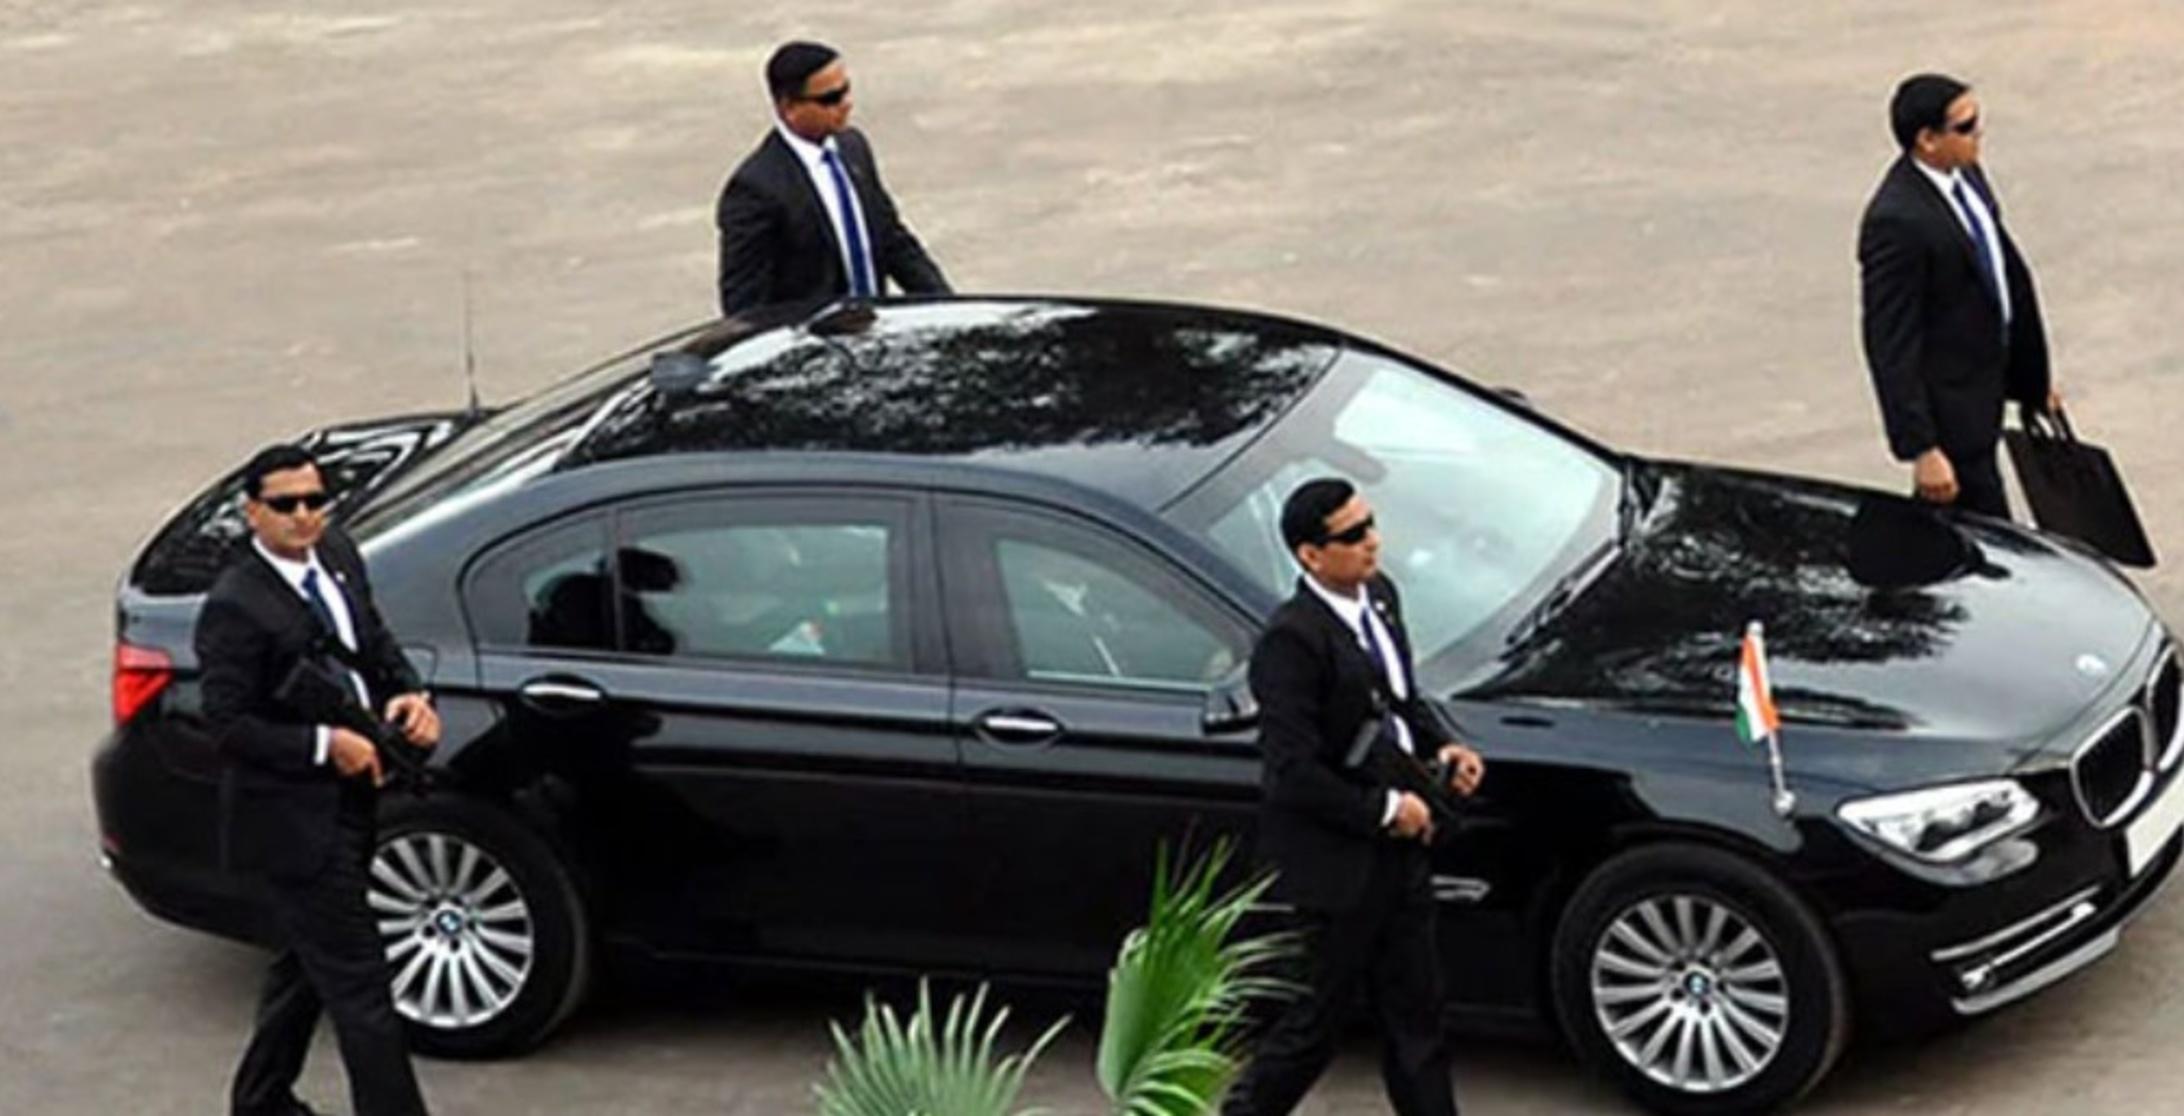 What Is In The Briefcase Of Indian PM Bodyguards?